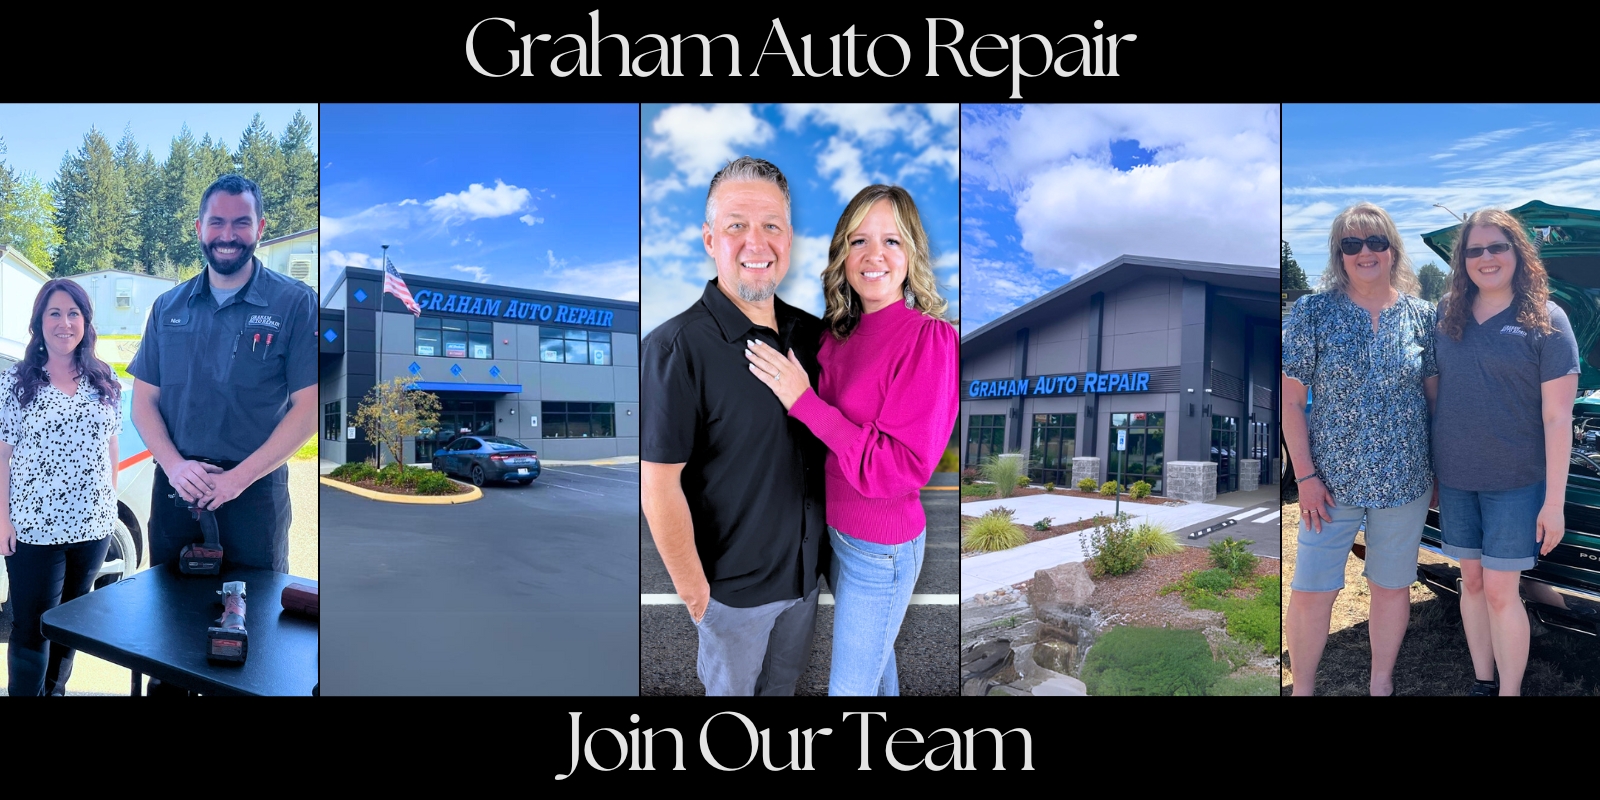 Graham Auto Repair serving locations in Graham, WA and Yelm, WA, inviting skilled automotive professionals to join our team.